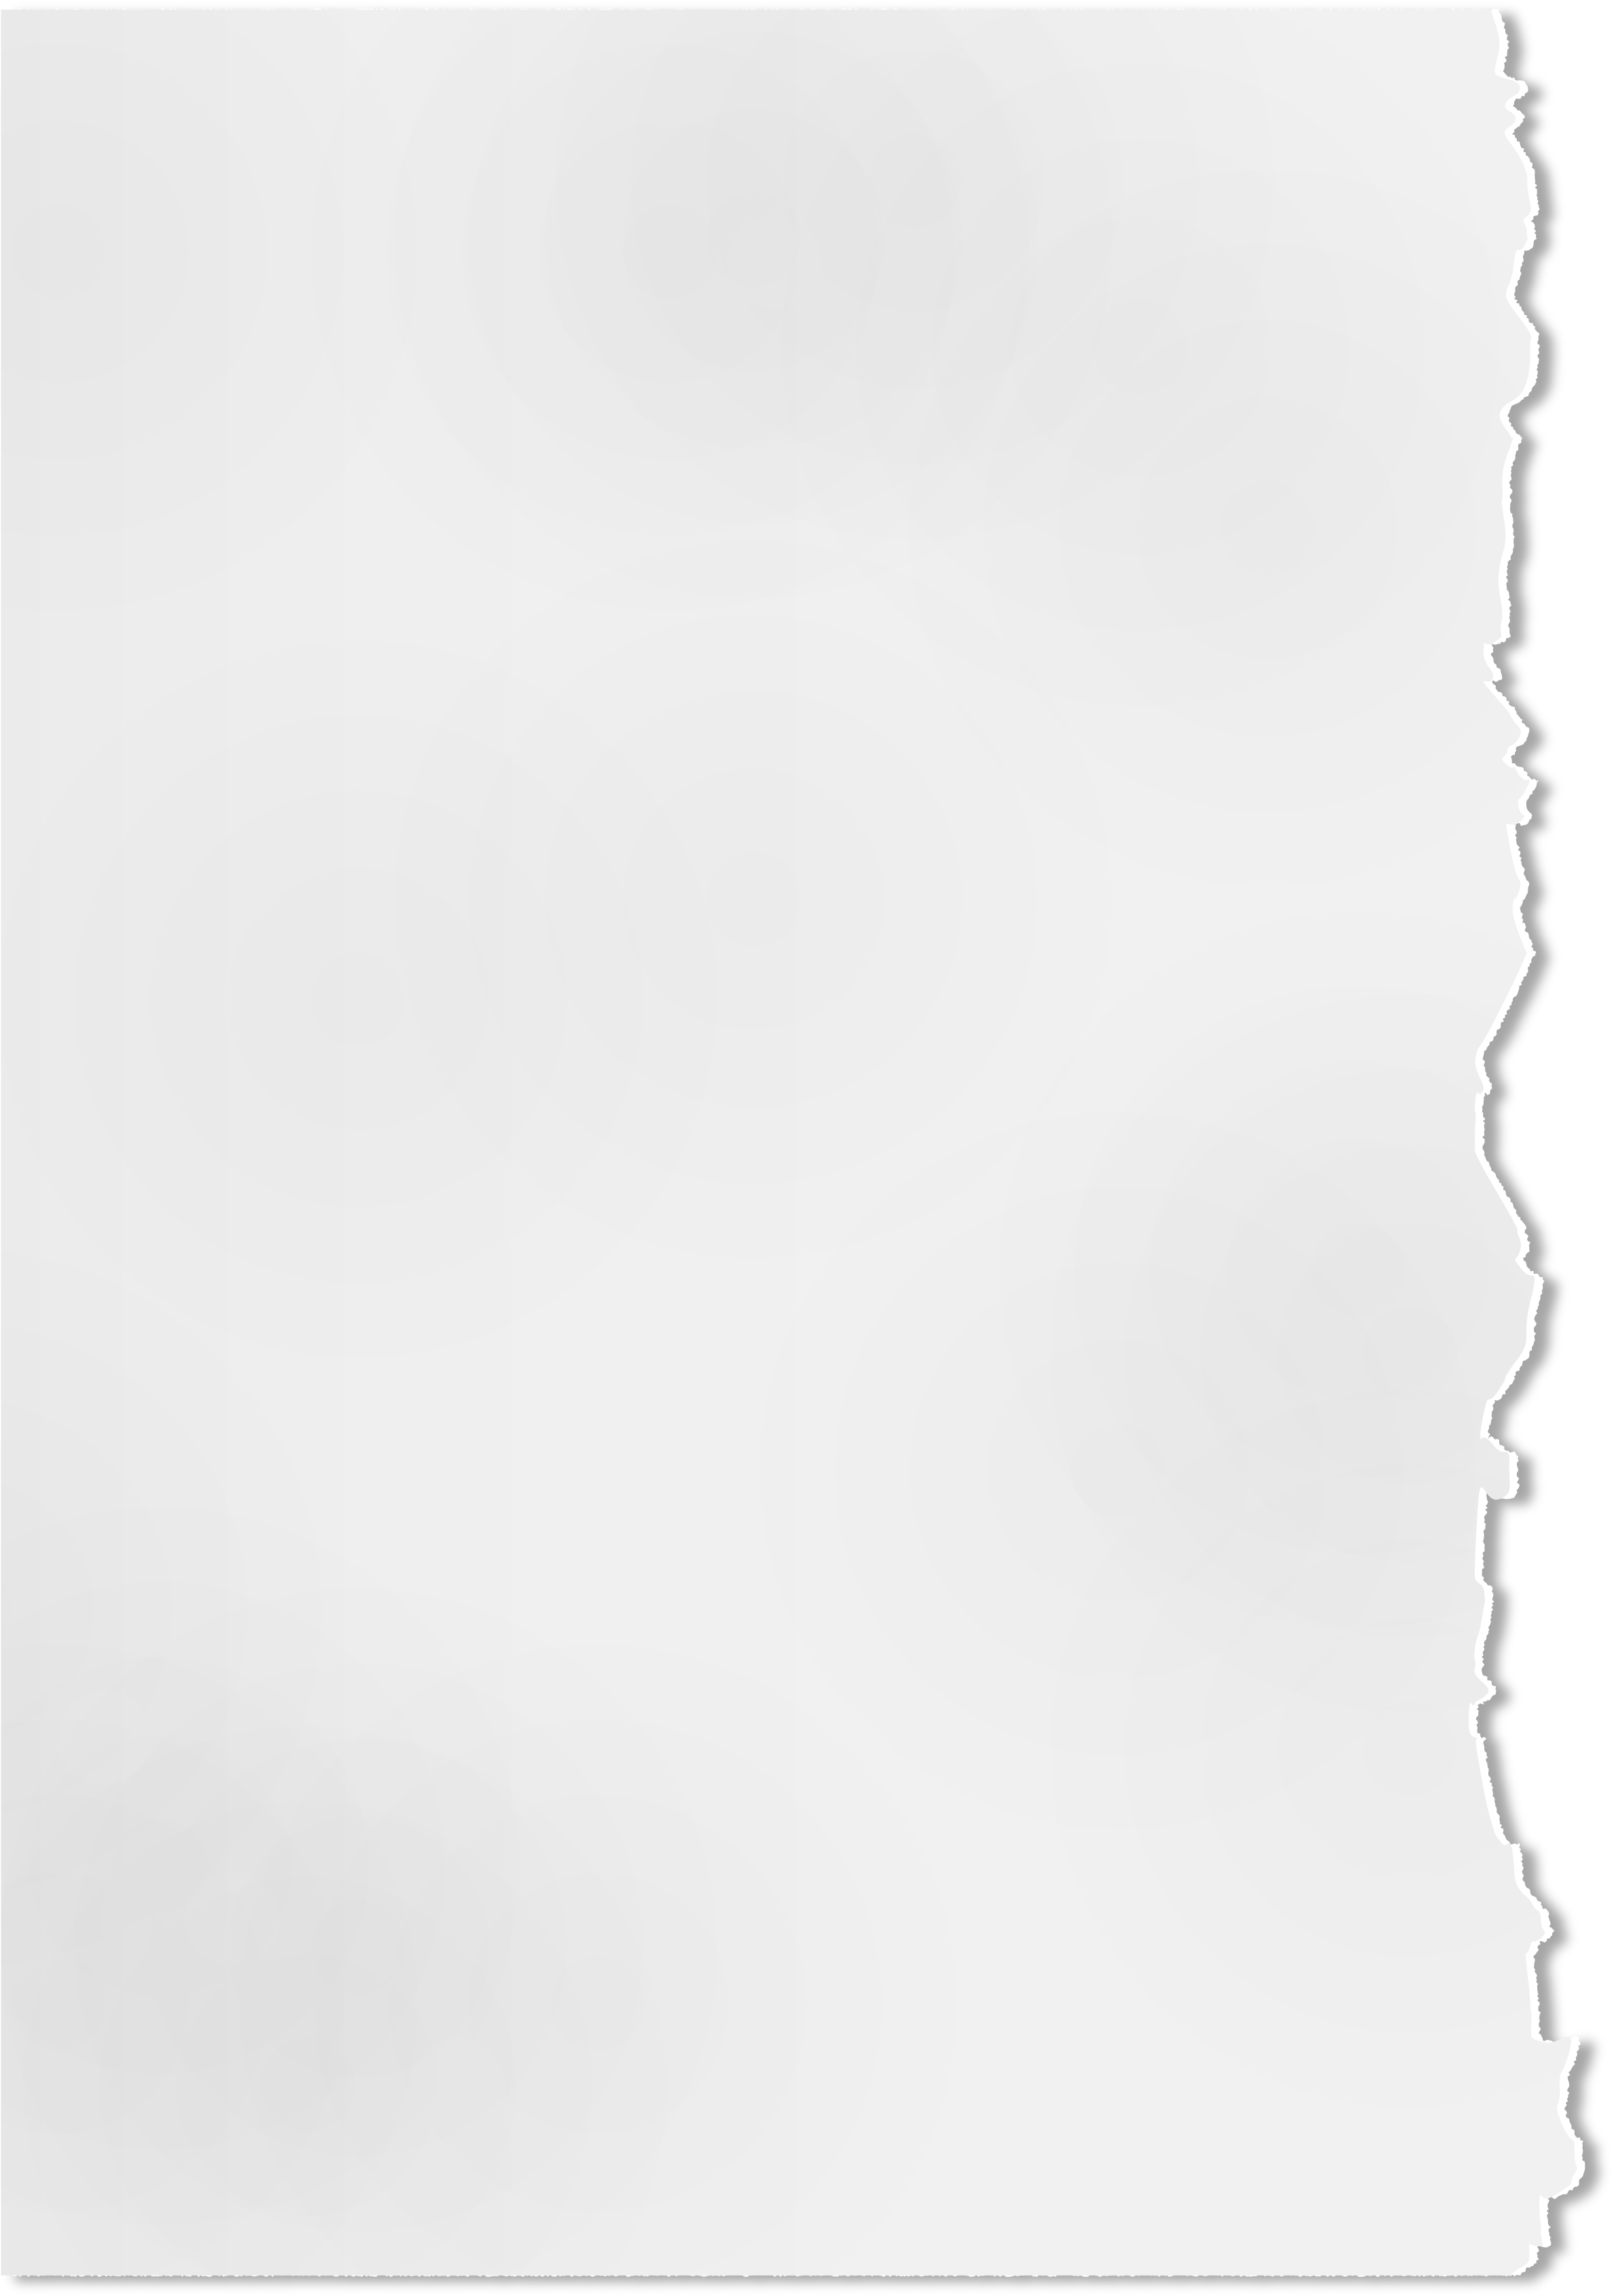 Ripped Paper PNG Transparent Images - PNG All